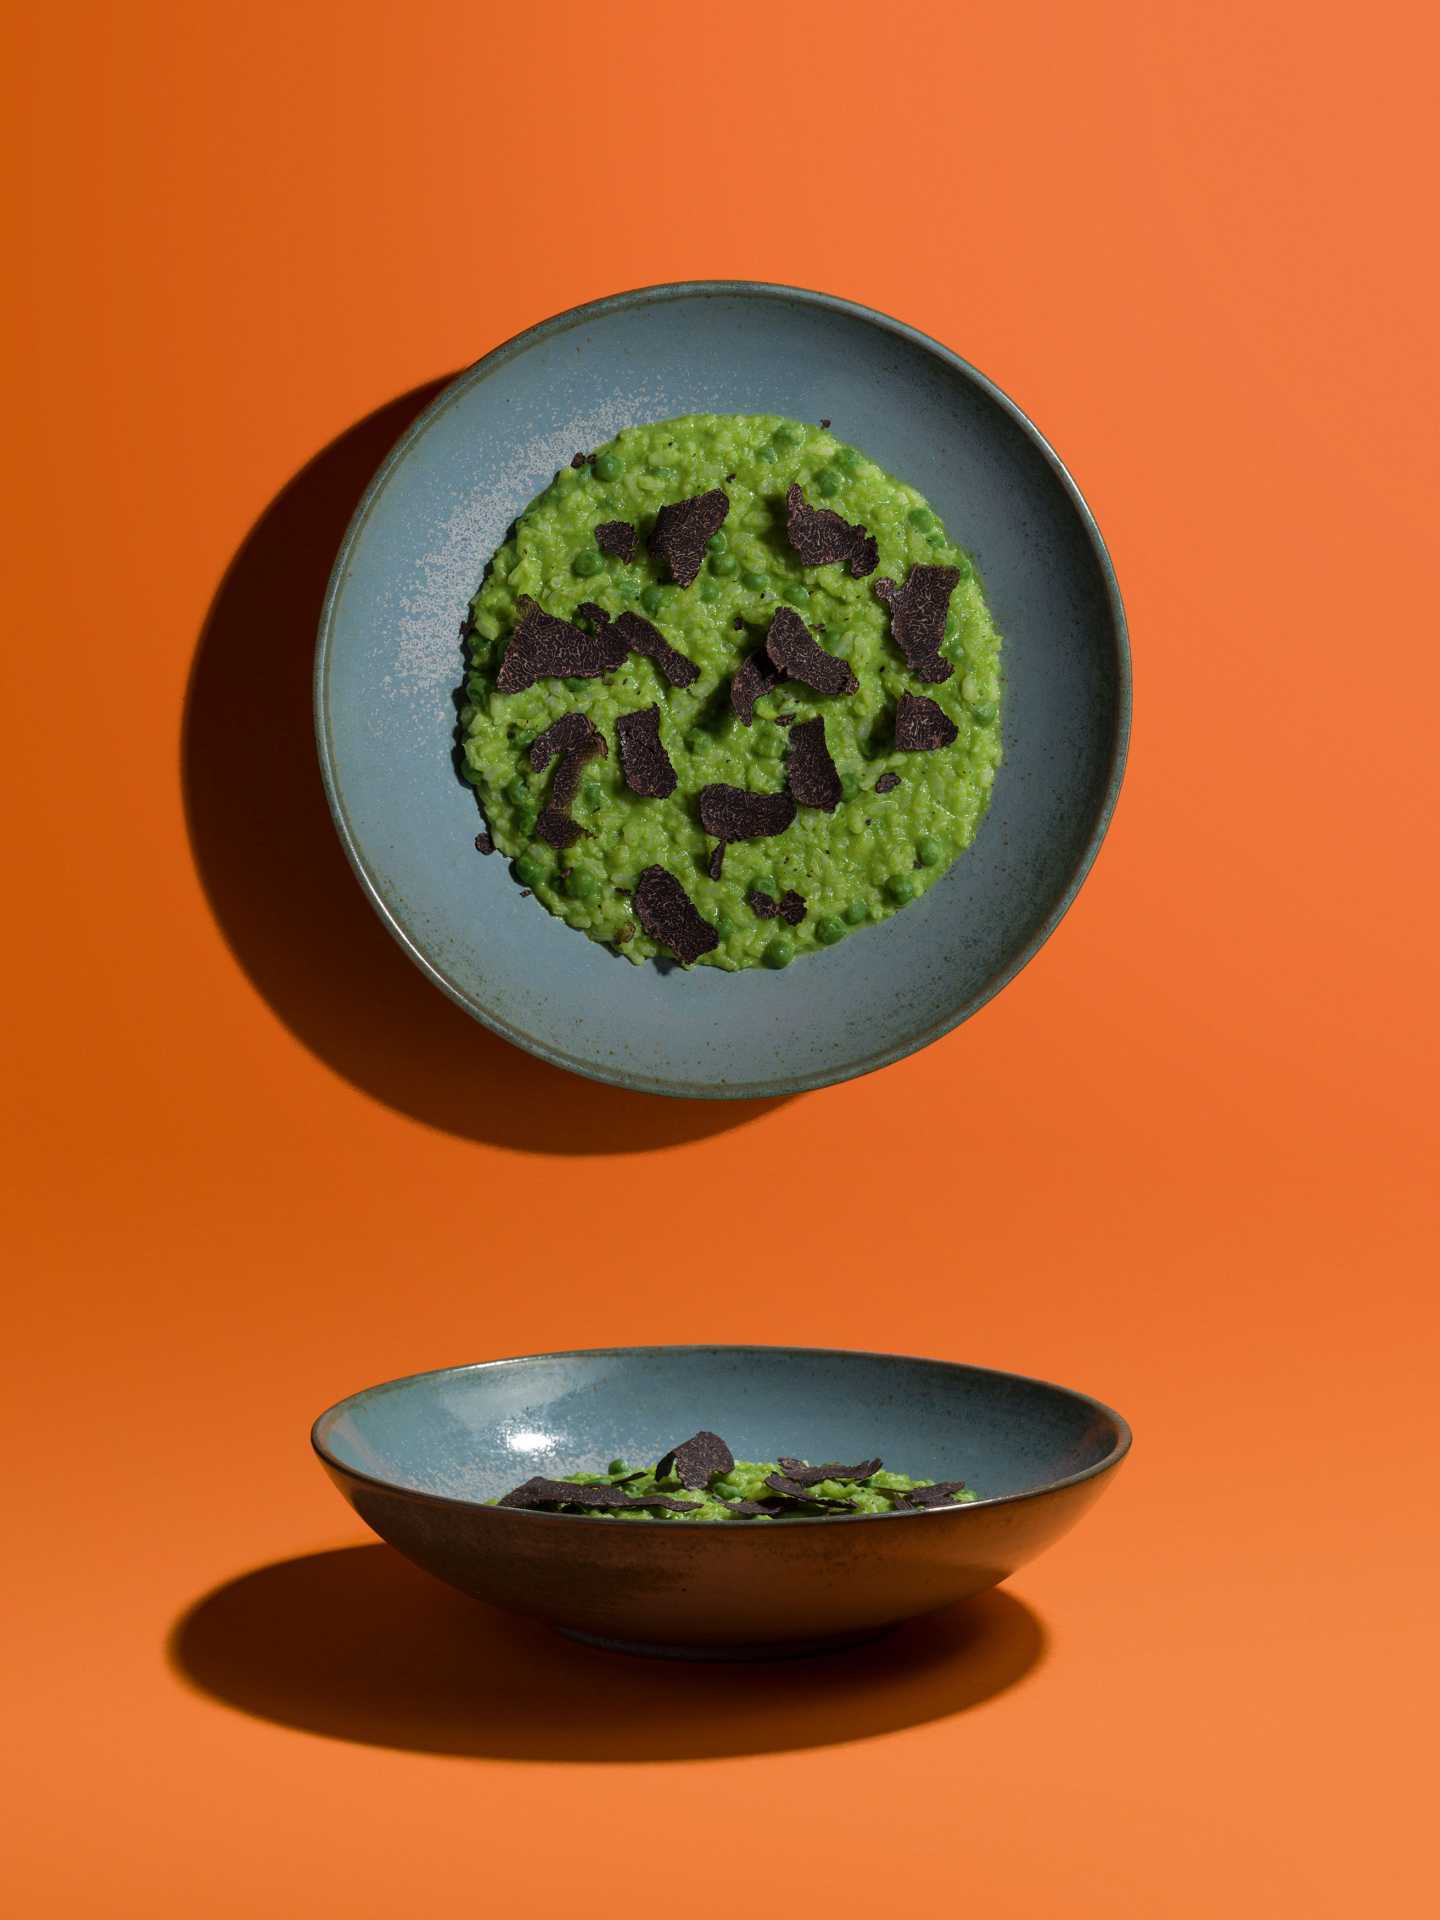 Ben Tish's Pea and truffle risotto